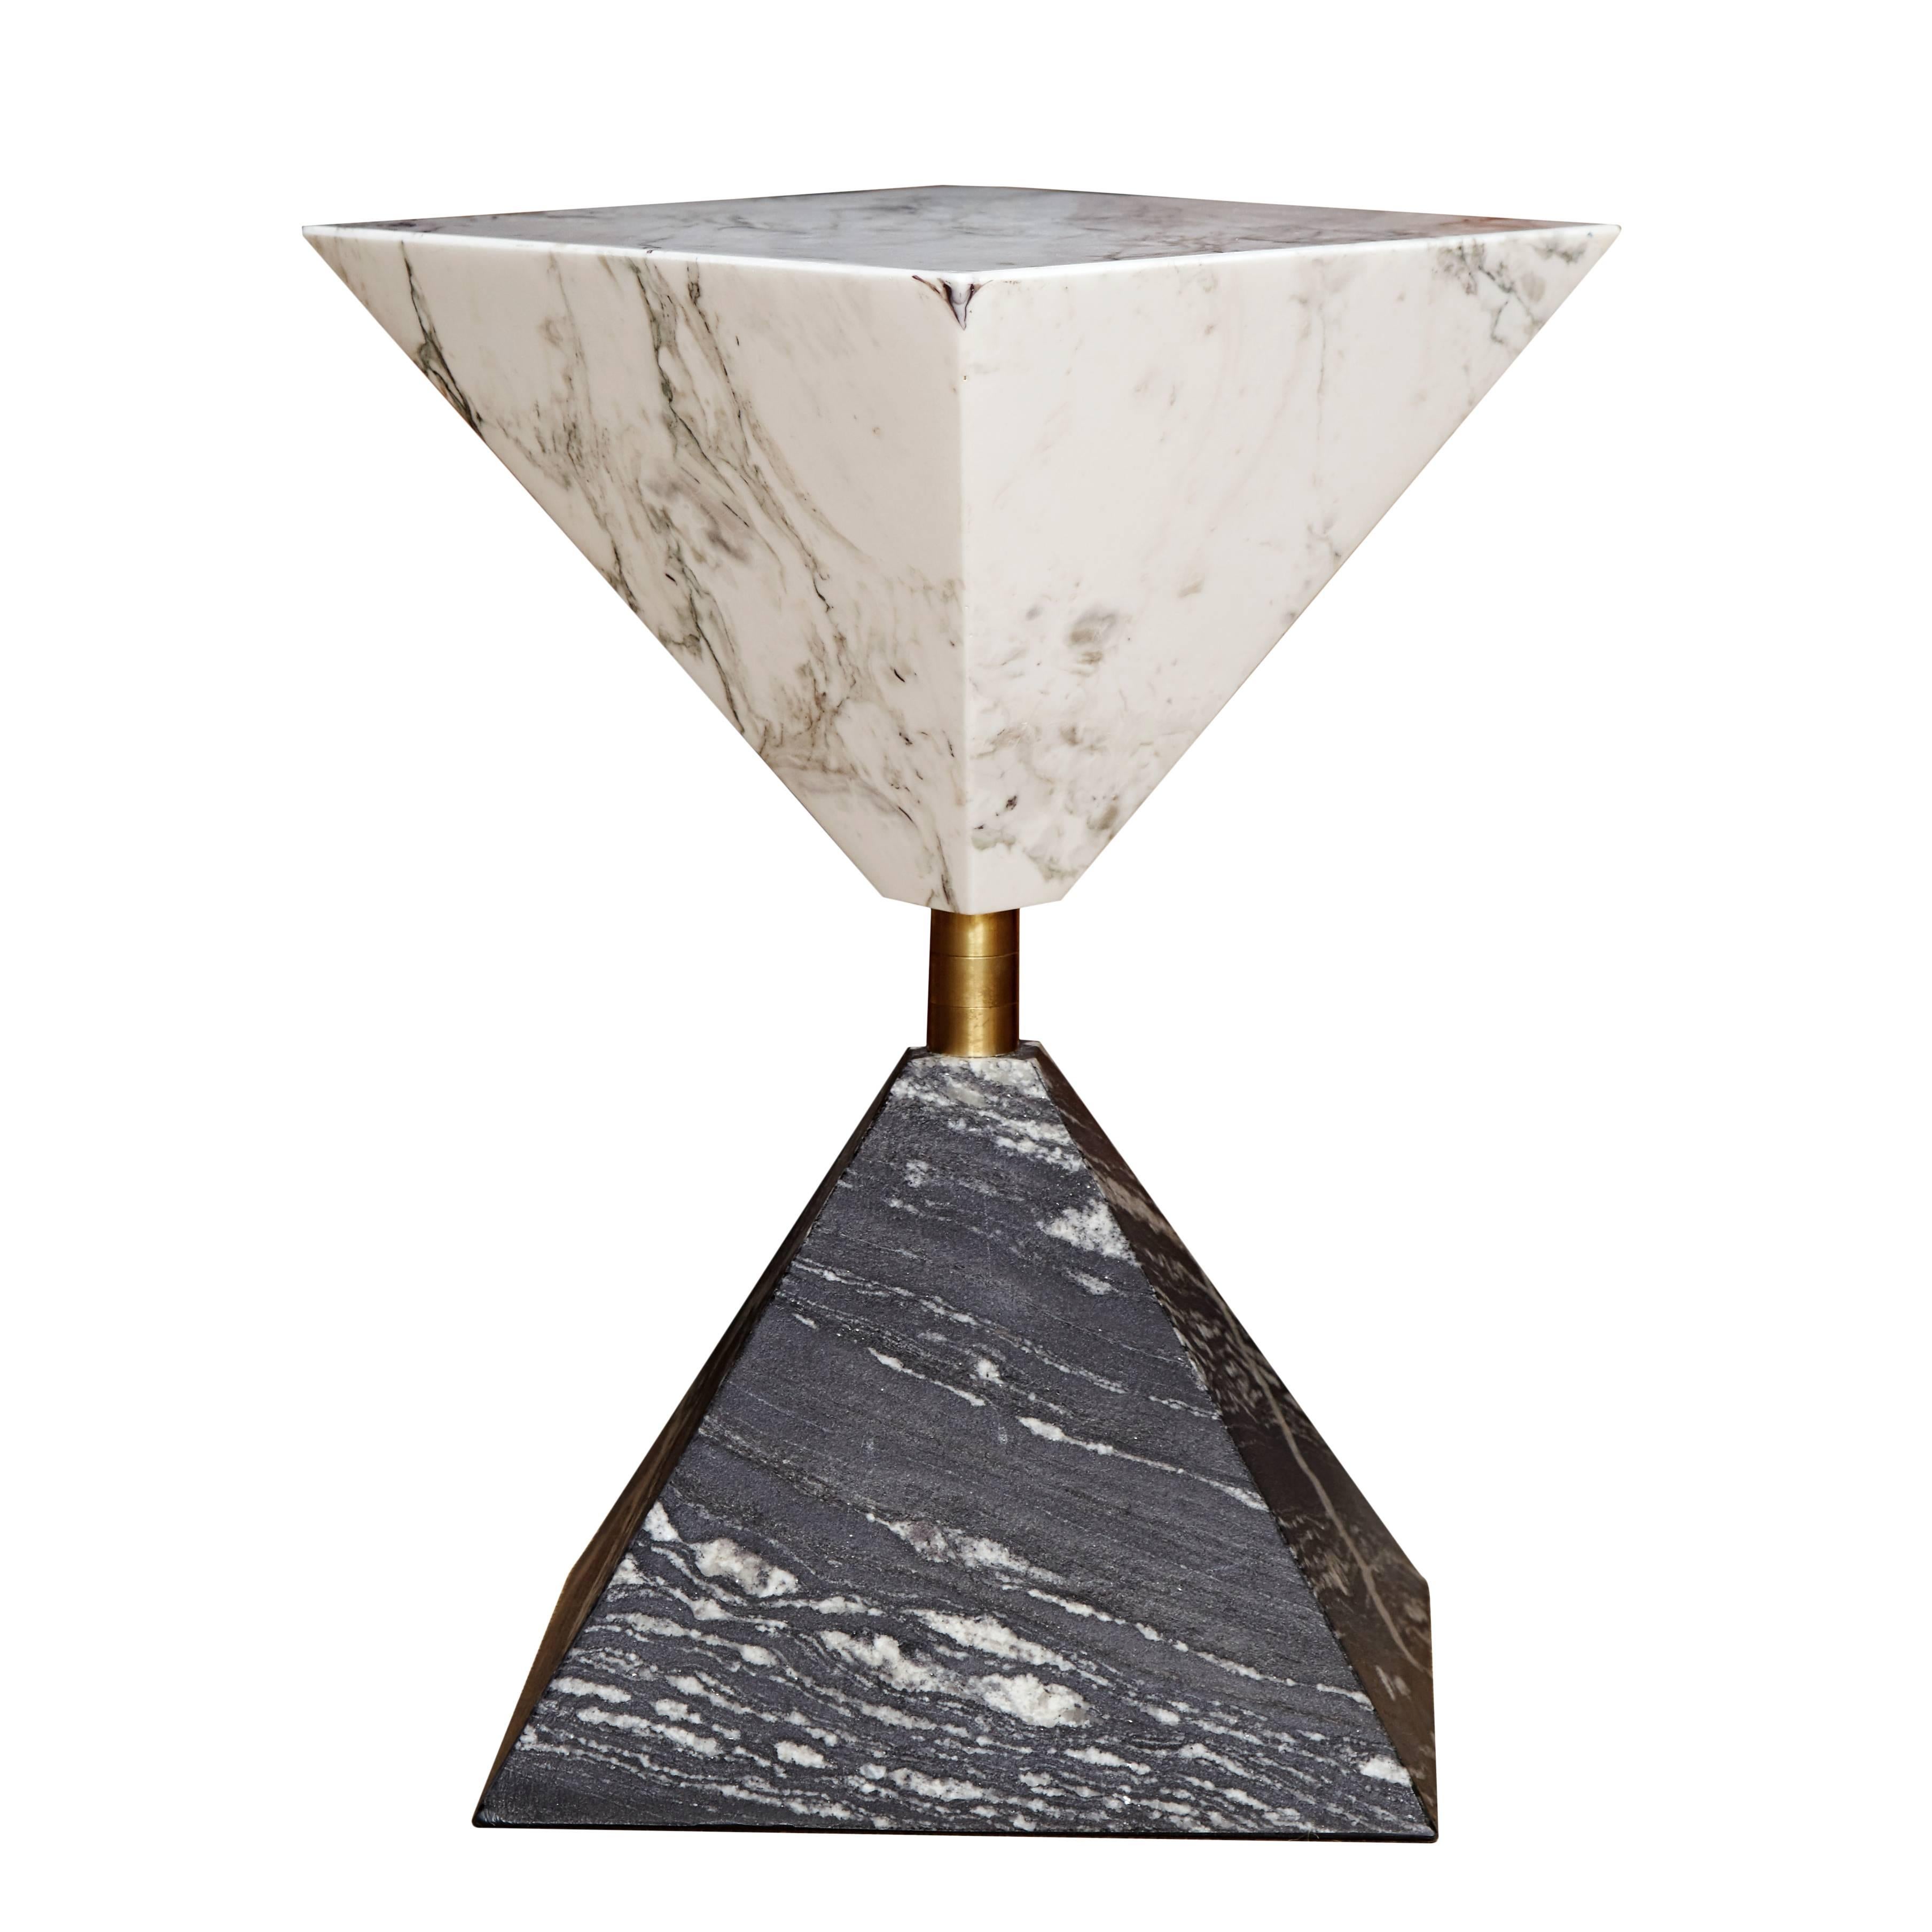 Erickson aesthetics statuary marble and green bamboo granite double pyramid table by Ben Erickson.
Custom orders have a lead time of 10-12 weeks FOB NYC. Lead time contingent upon selection of finishes, approval of shop drawings (if applicable),